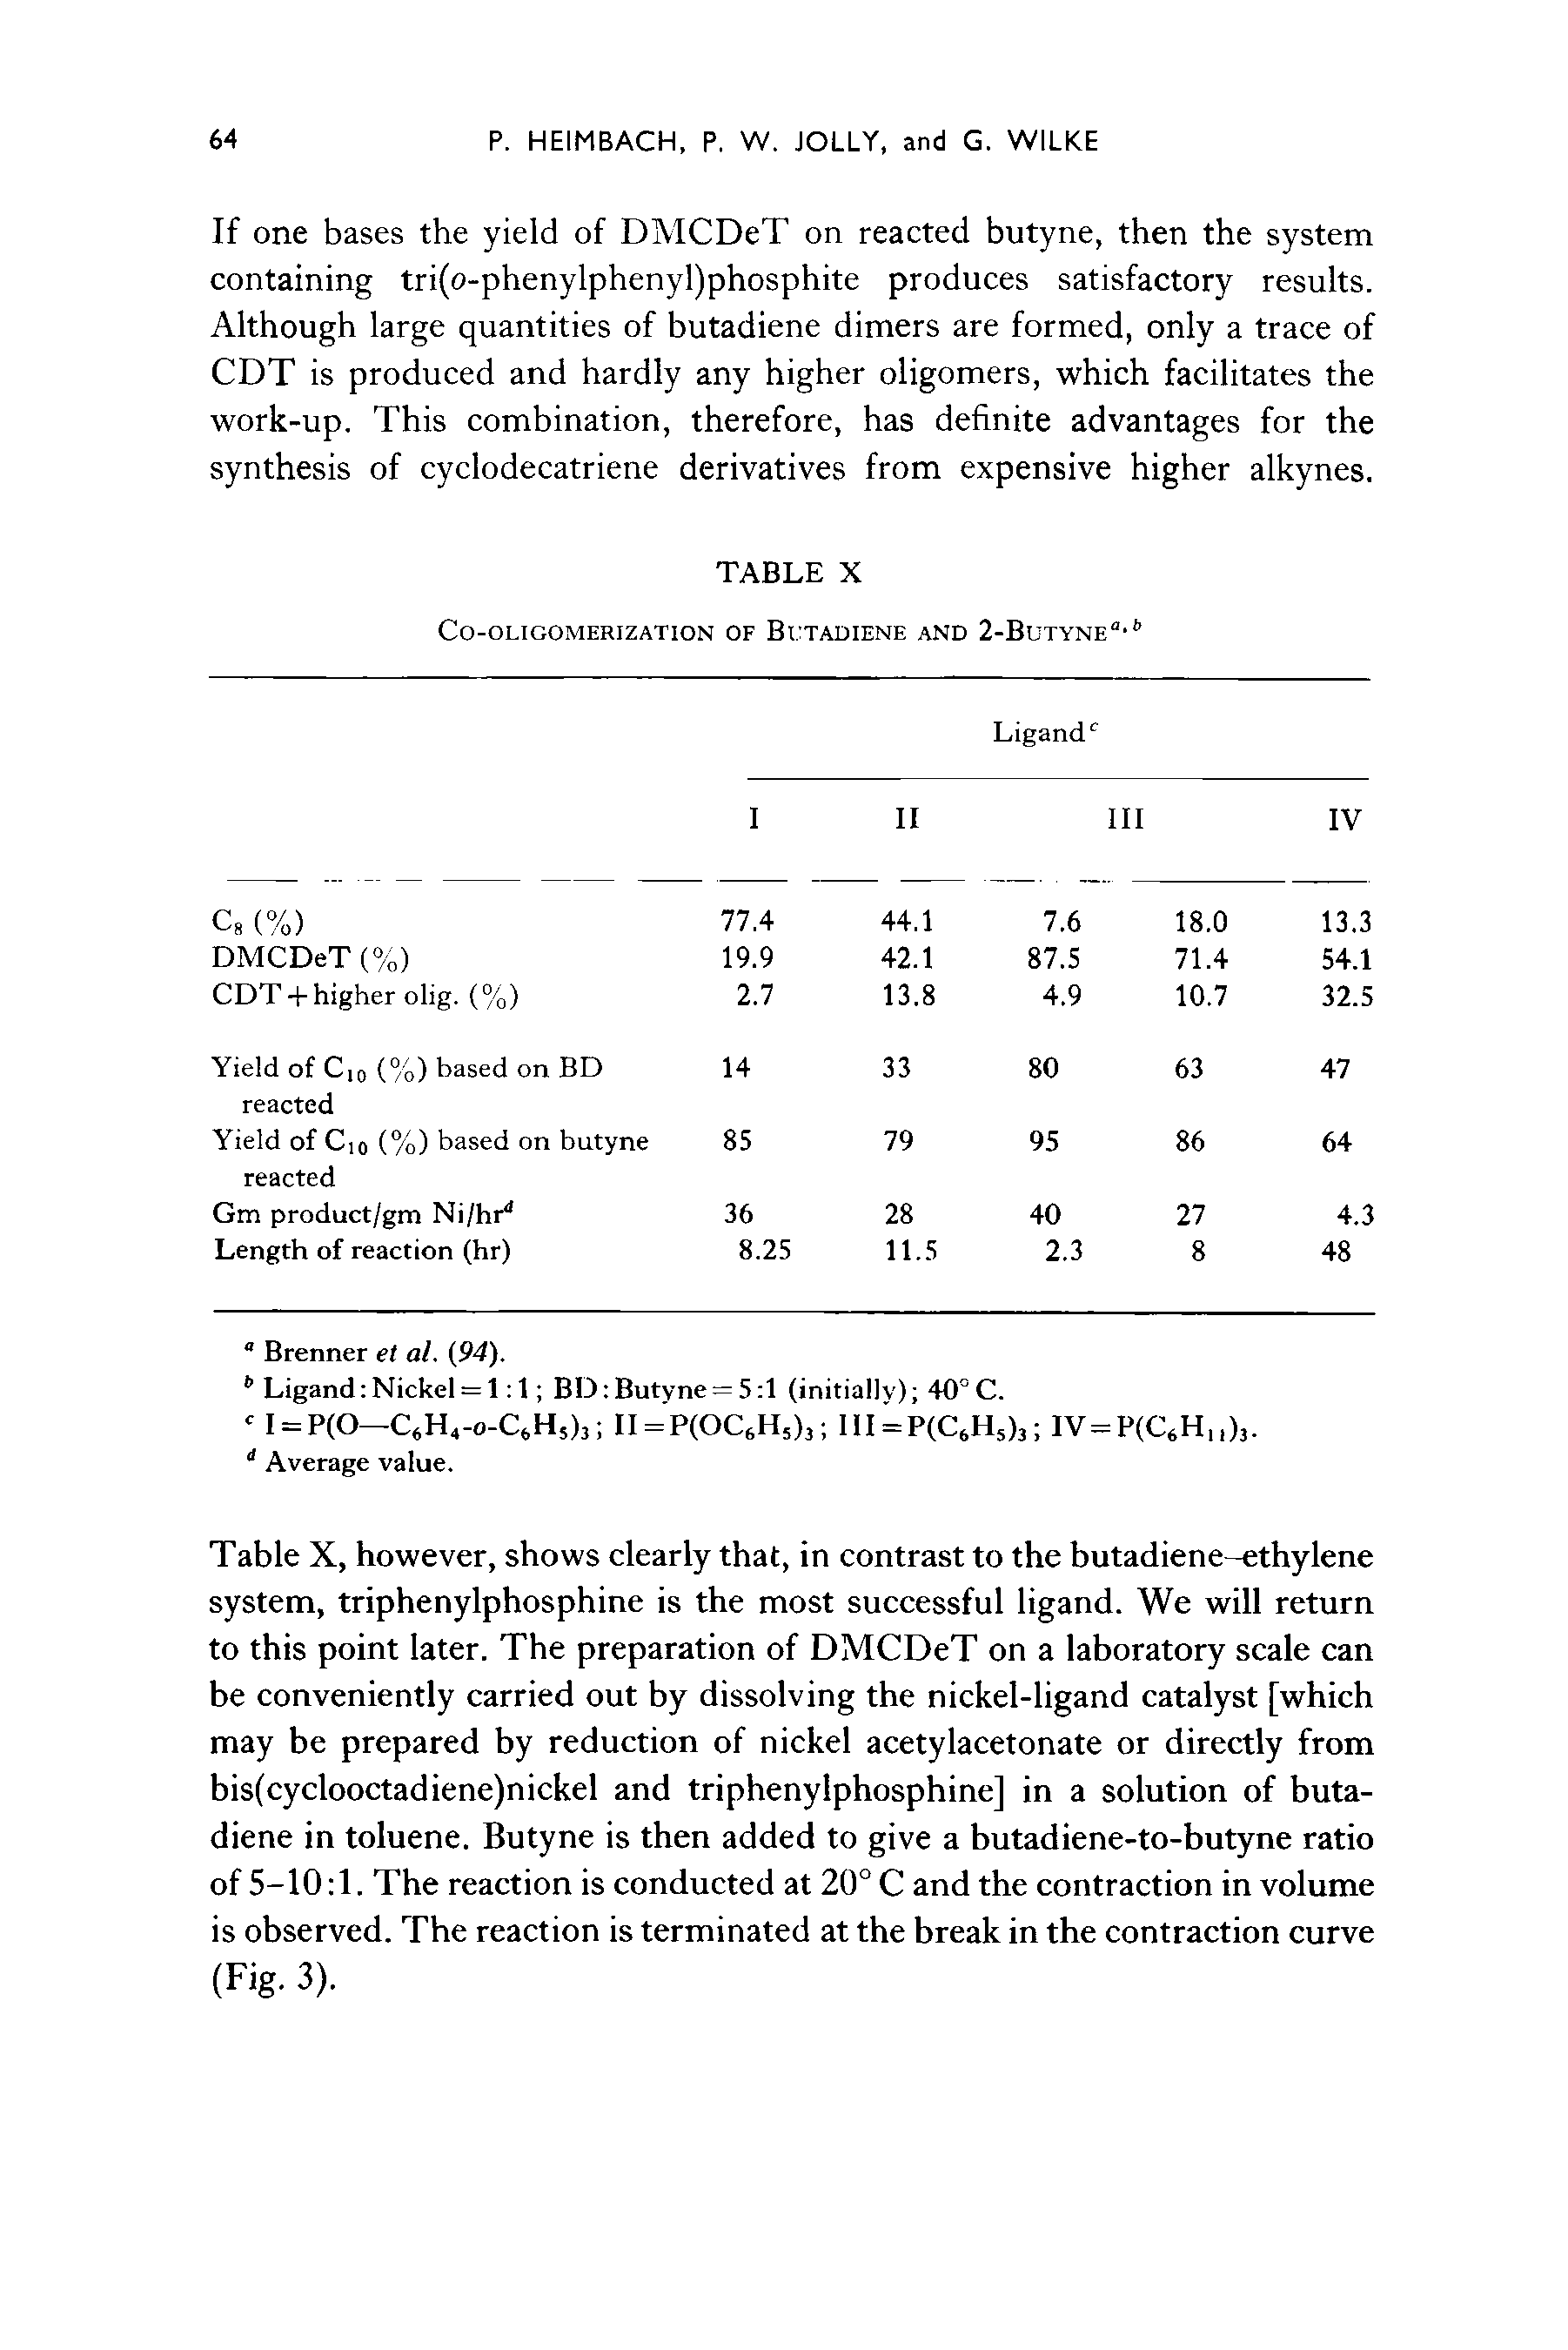 Table X, however, shows clearly that, in contrast to the butadiene-ethylene system, triphenylphosphine is the most successful ligand. We will return to this point later. The preparation of DMCDeT on a laboratory scale can be conveniently carried out by dissolving the nickel-ligand catalyst [which may be prepared by reduction of nickel acetylacetonate or directly from bis(cyclooctadiene)nickel and triphenylphosphine] in a solution of butadiene in toluene. Butyne is then added to give a butadiene-to-butyne ratio of 5-10 1. The reaction is conducted at 20° C and the contraction in volume is observed. The reaction is terminated at the break in the contraction curve (Fig. 3).